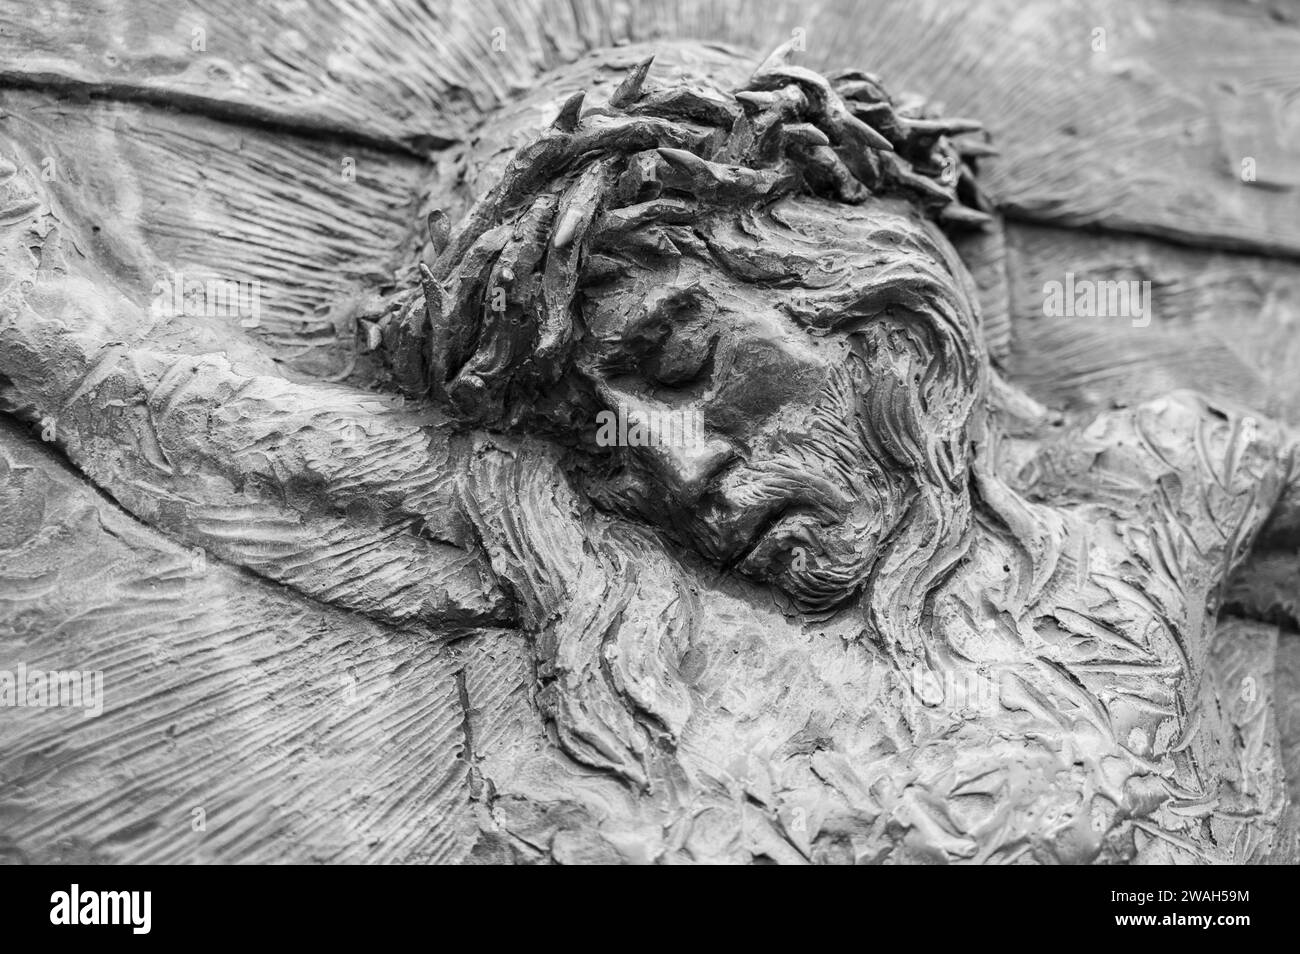 The Crucifixion of Jesus – Fifth Sorrowful Mystery of the Rosary. A relief sculpture on Mount Podbrdo (the Hill of Apparitions) in Medjugorje. Stock Photo